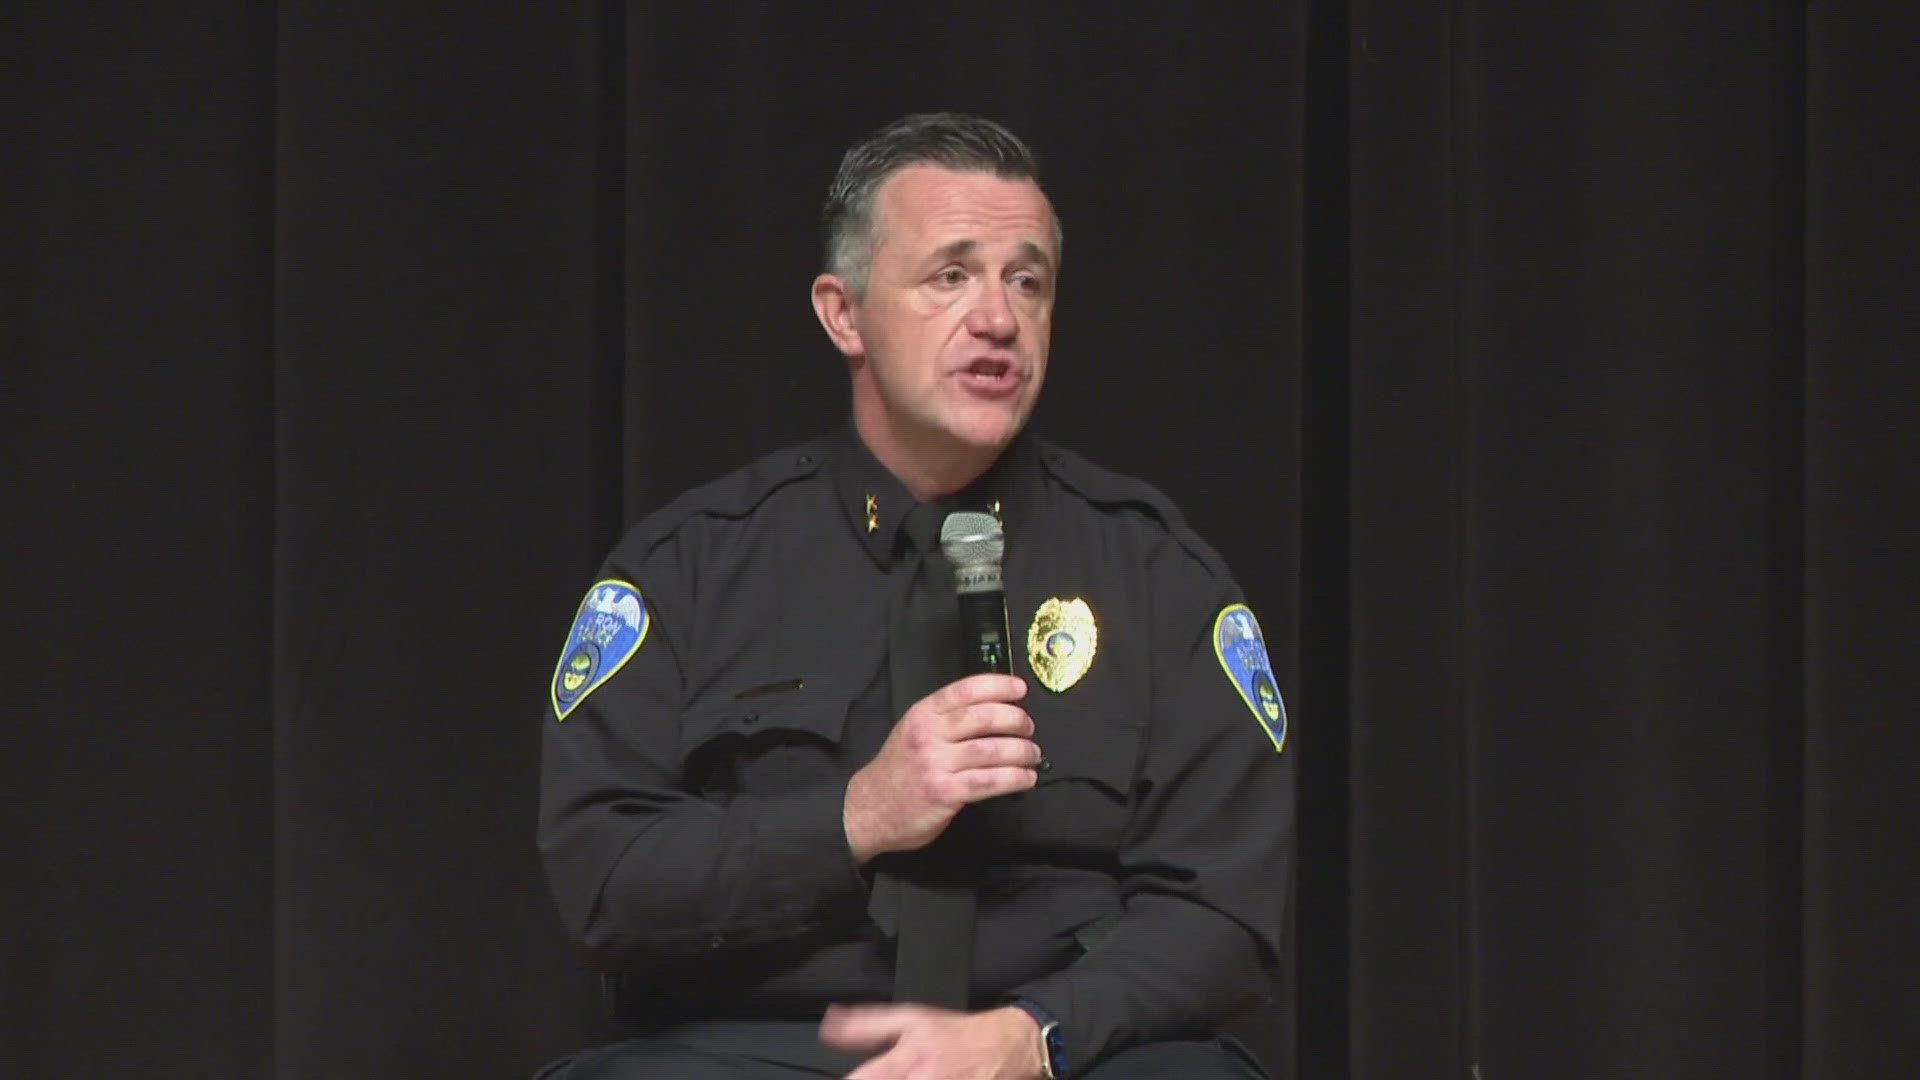 The final candidate for Akron's police chief was in the hot seat Saturday as residents voiced concerns and peppered Brian Harding with questions at a town hall event